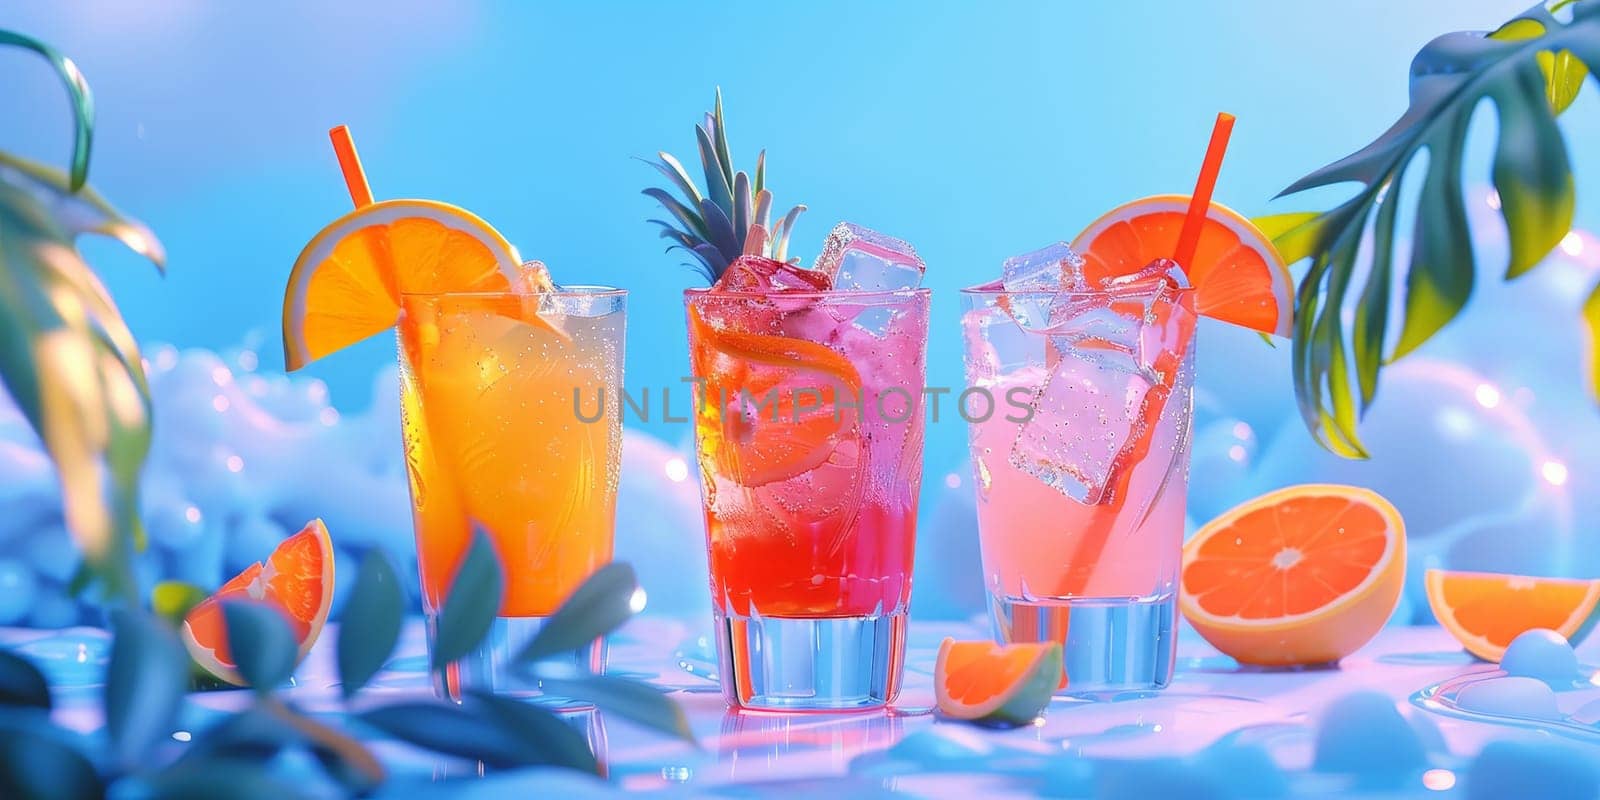 Three colorful drinks with straws in them are on a table with oranges and leaves. The drinks are in tall glasses and the table is set in a tropical setting